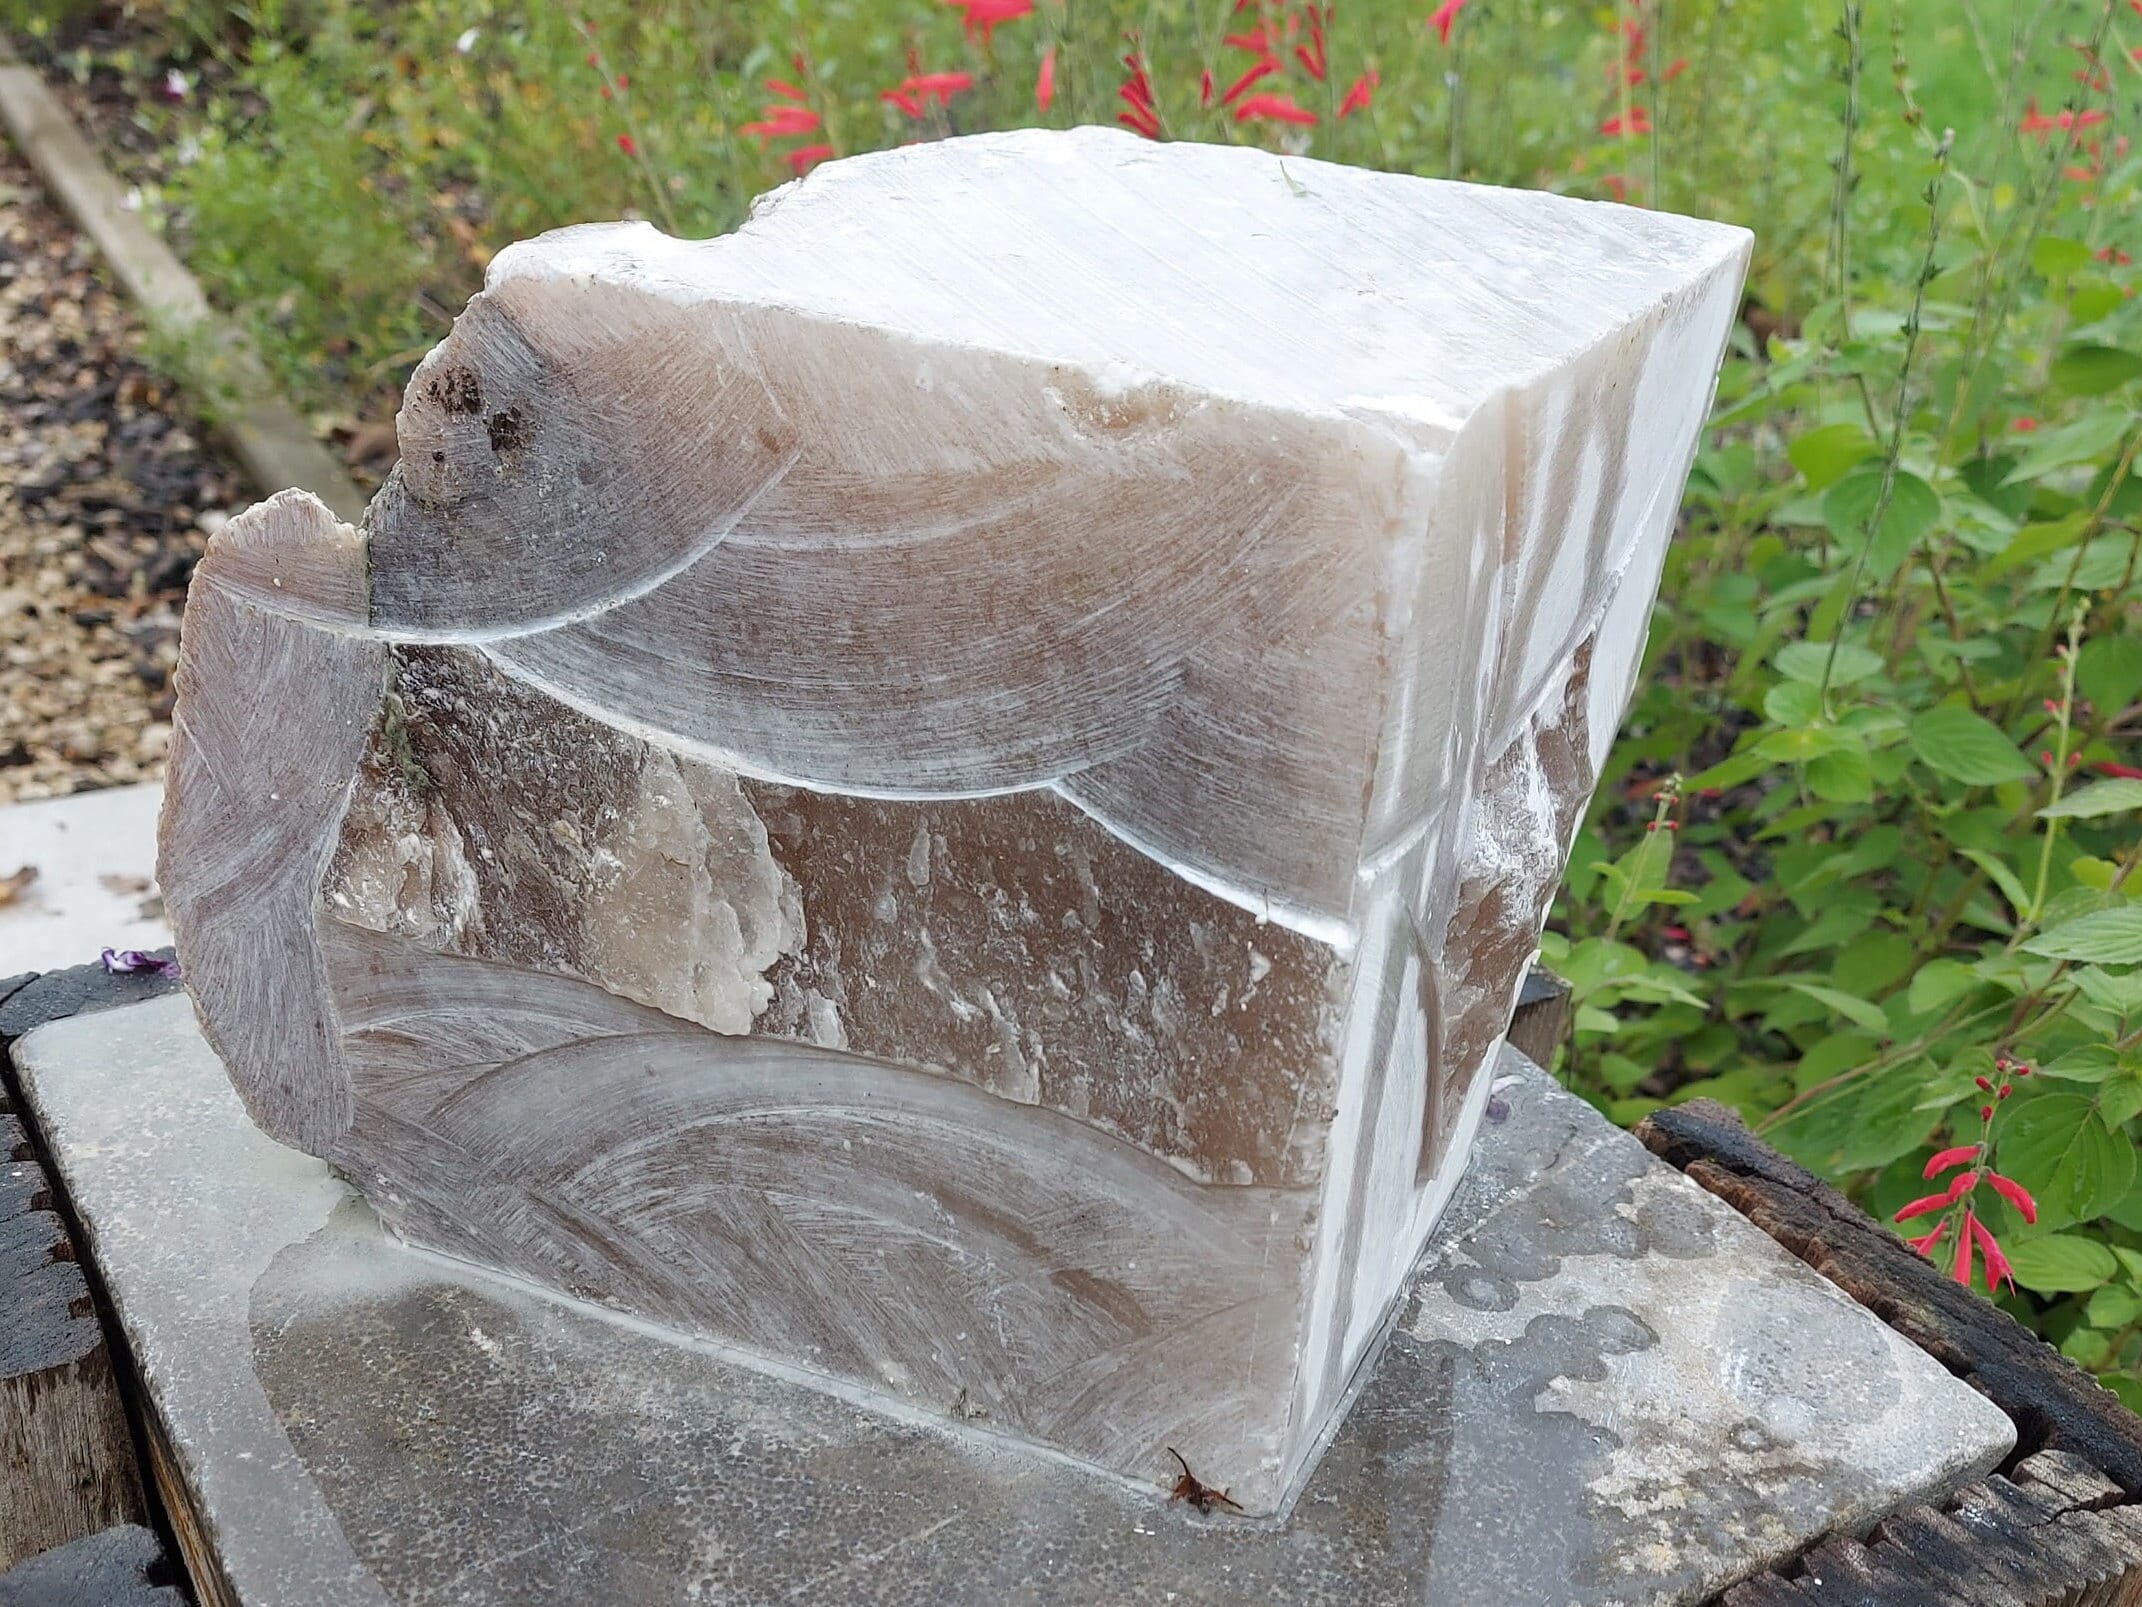 4lb Soapstone Block for Carving